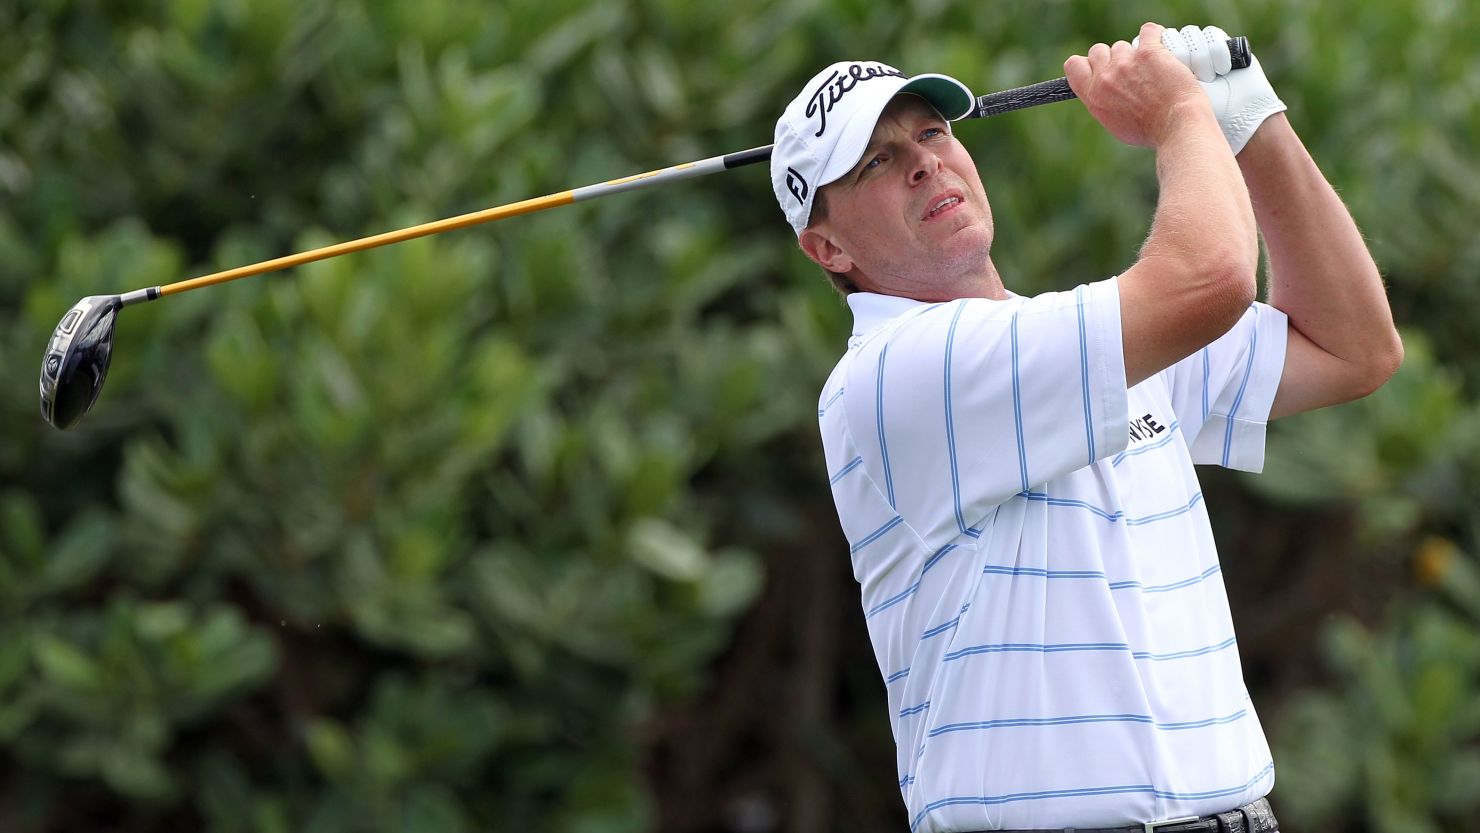 Steve Stricker hits an approach during his second round 63 at the Tournament of Champions in Hawaii.